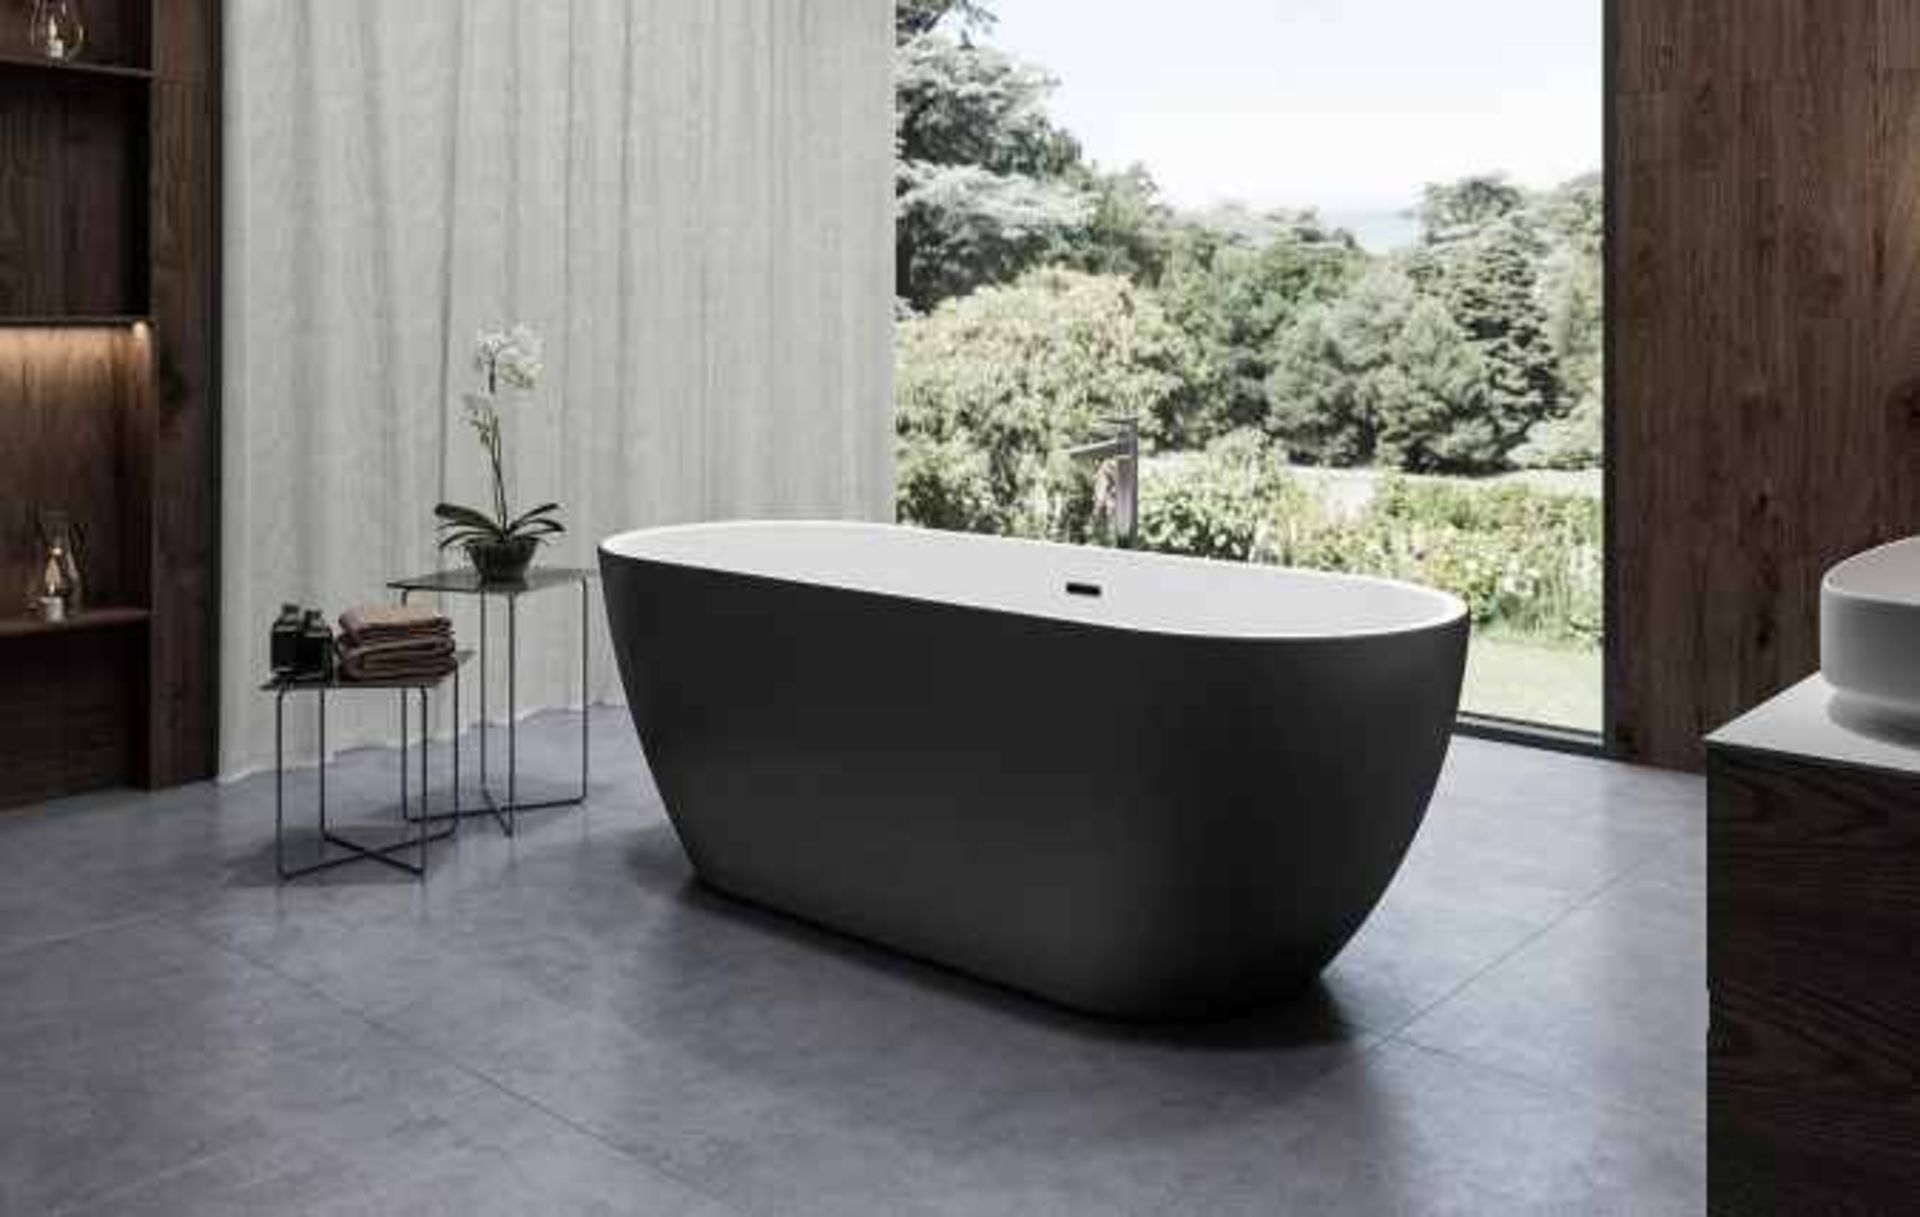 New (V2) 1655x740mm Round Double Ended Black Freestanding Bath. RRP £2,337. Elegant, Contempor... - Image 3 of 3